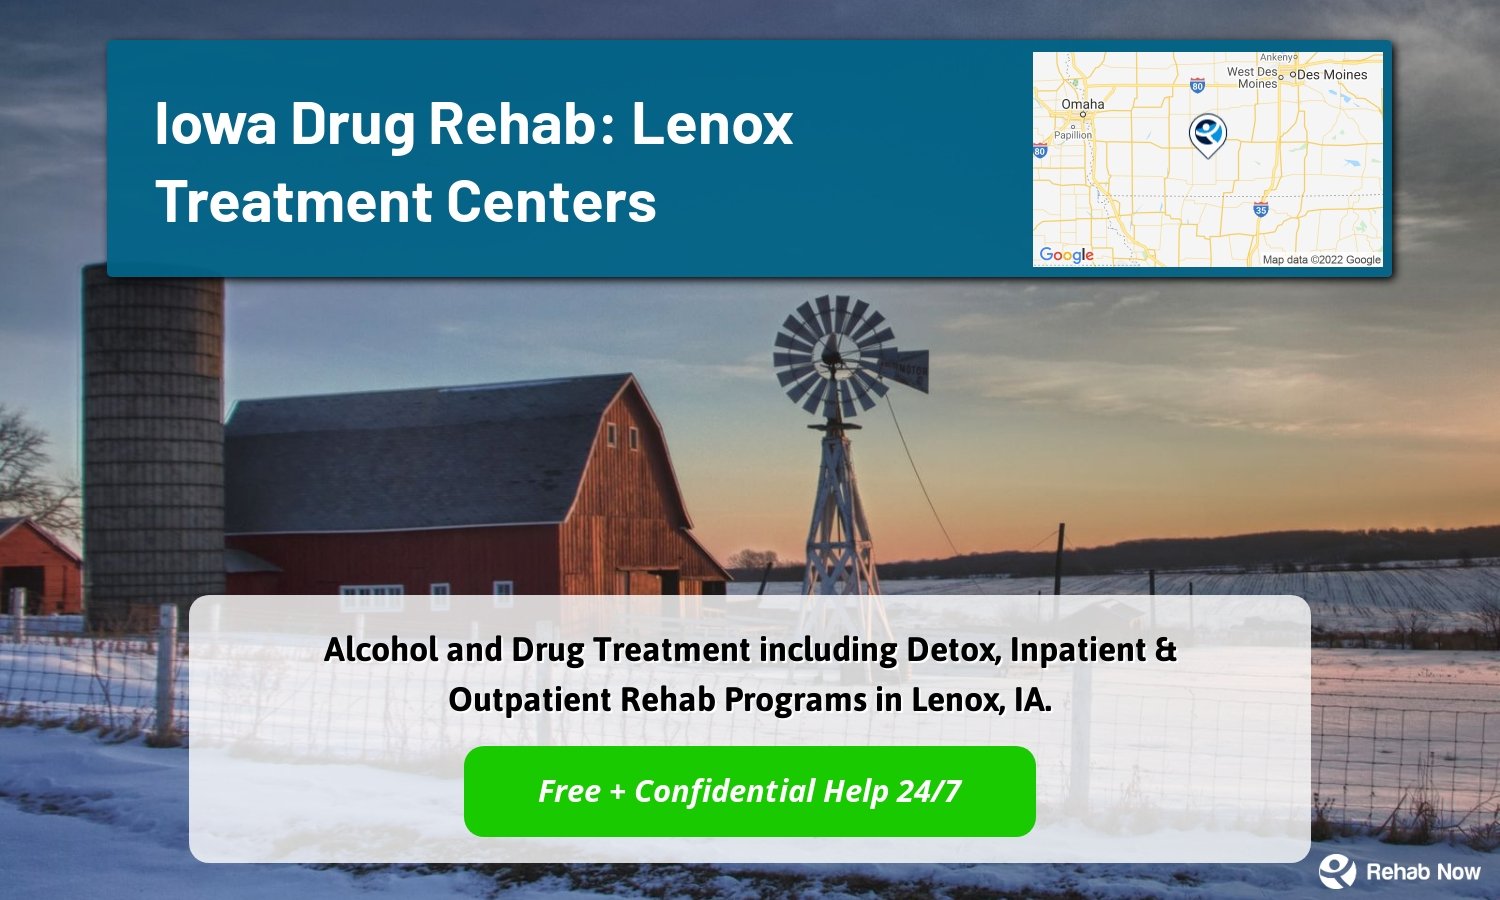 Alcohol and Drug Treatment including Detox, Inpatient & Outpatient Rehab Programs in Lenox, IA.